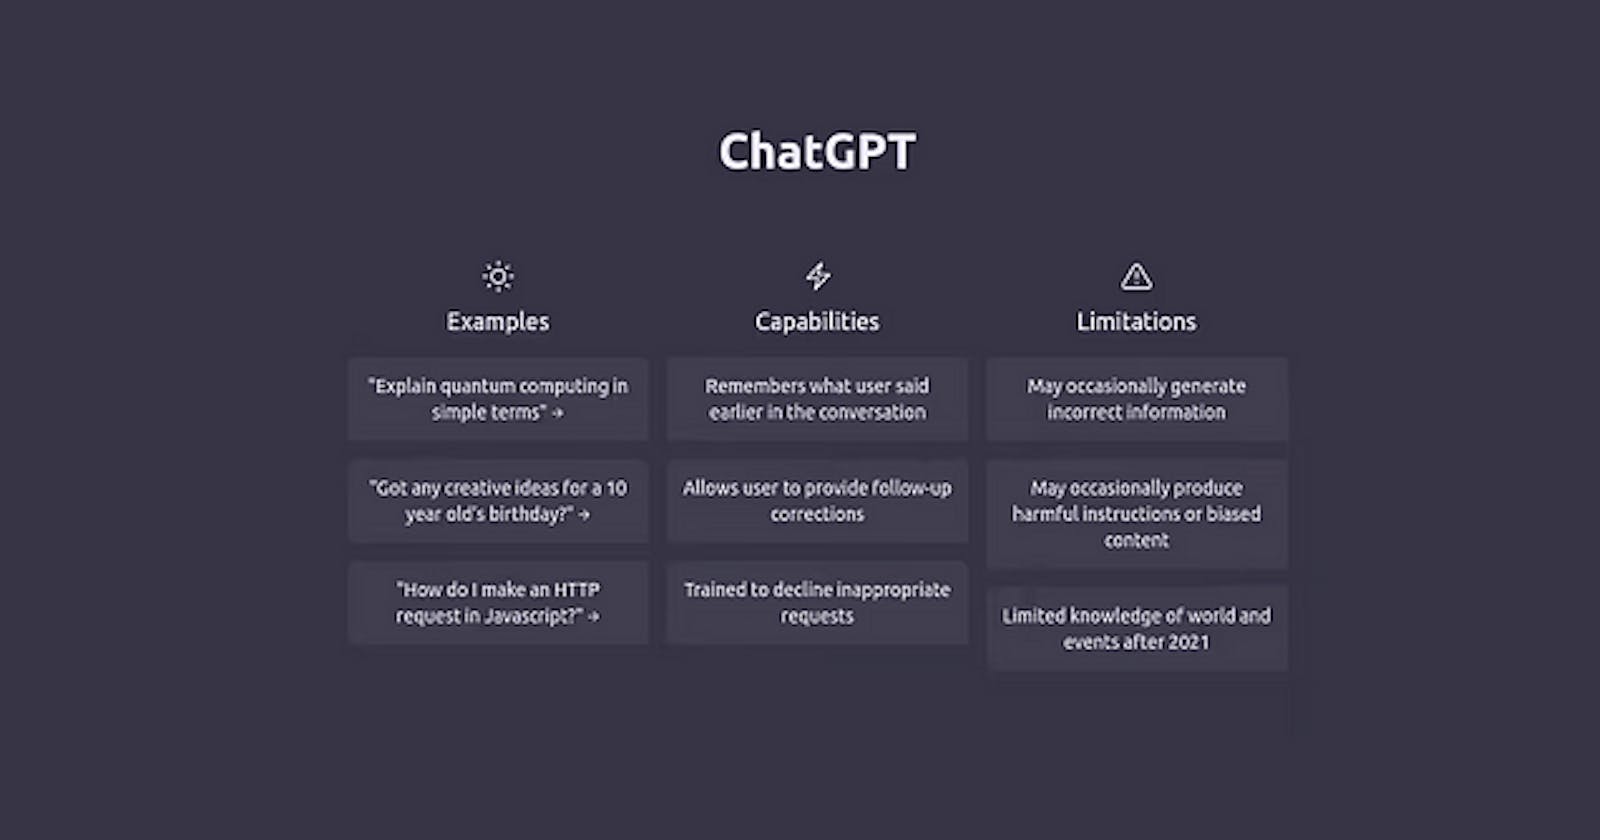 Addressing the biggest elephant in any room right now: ChatGPT.